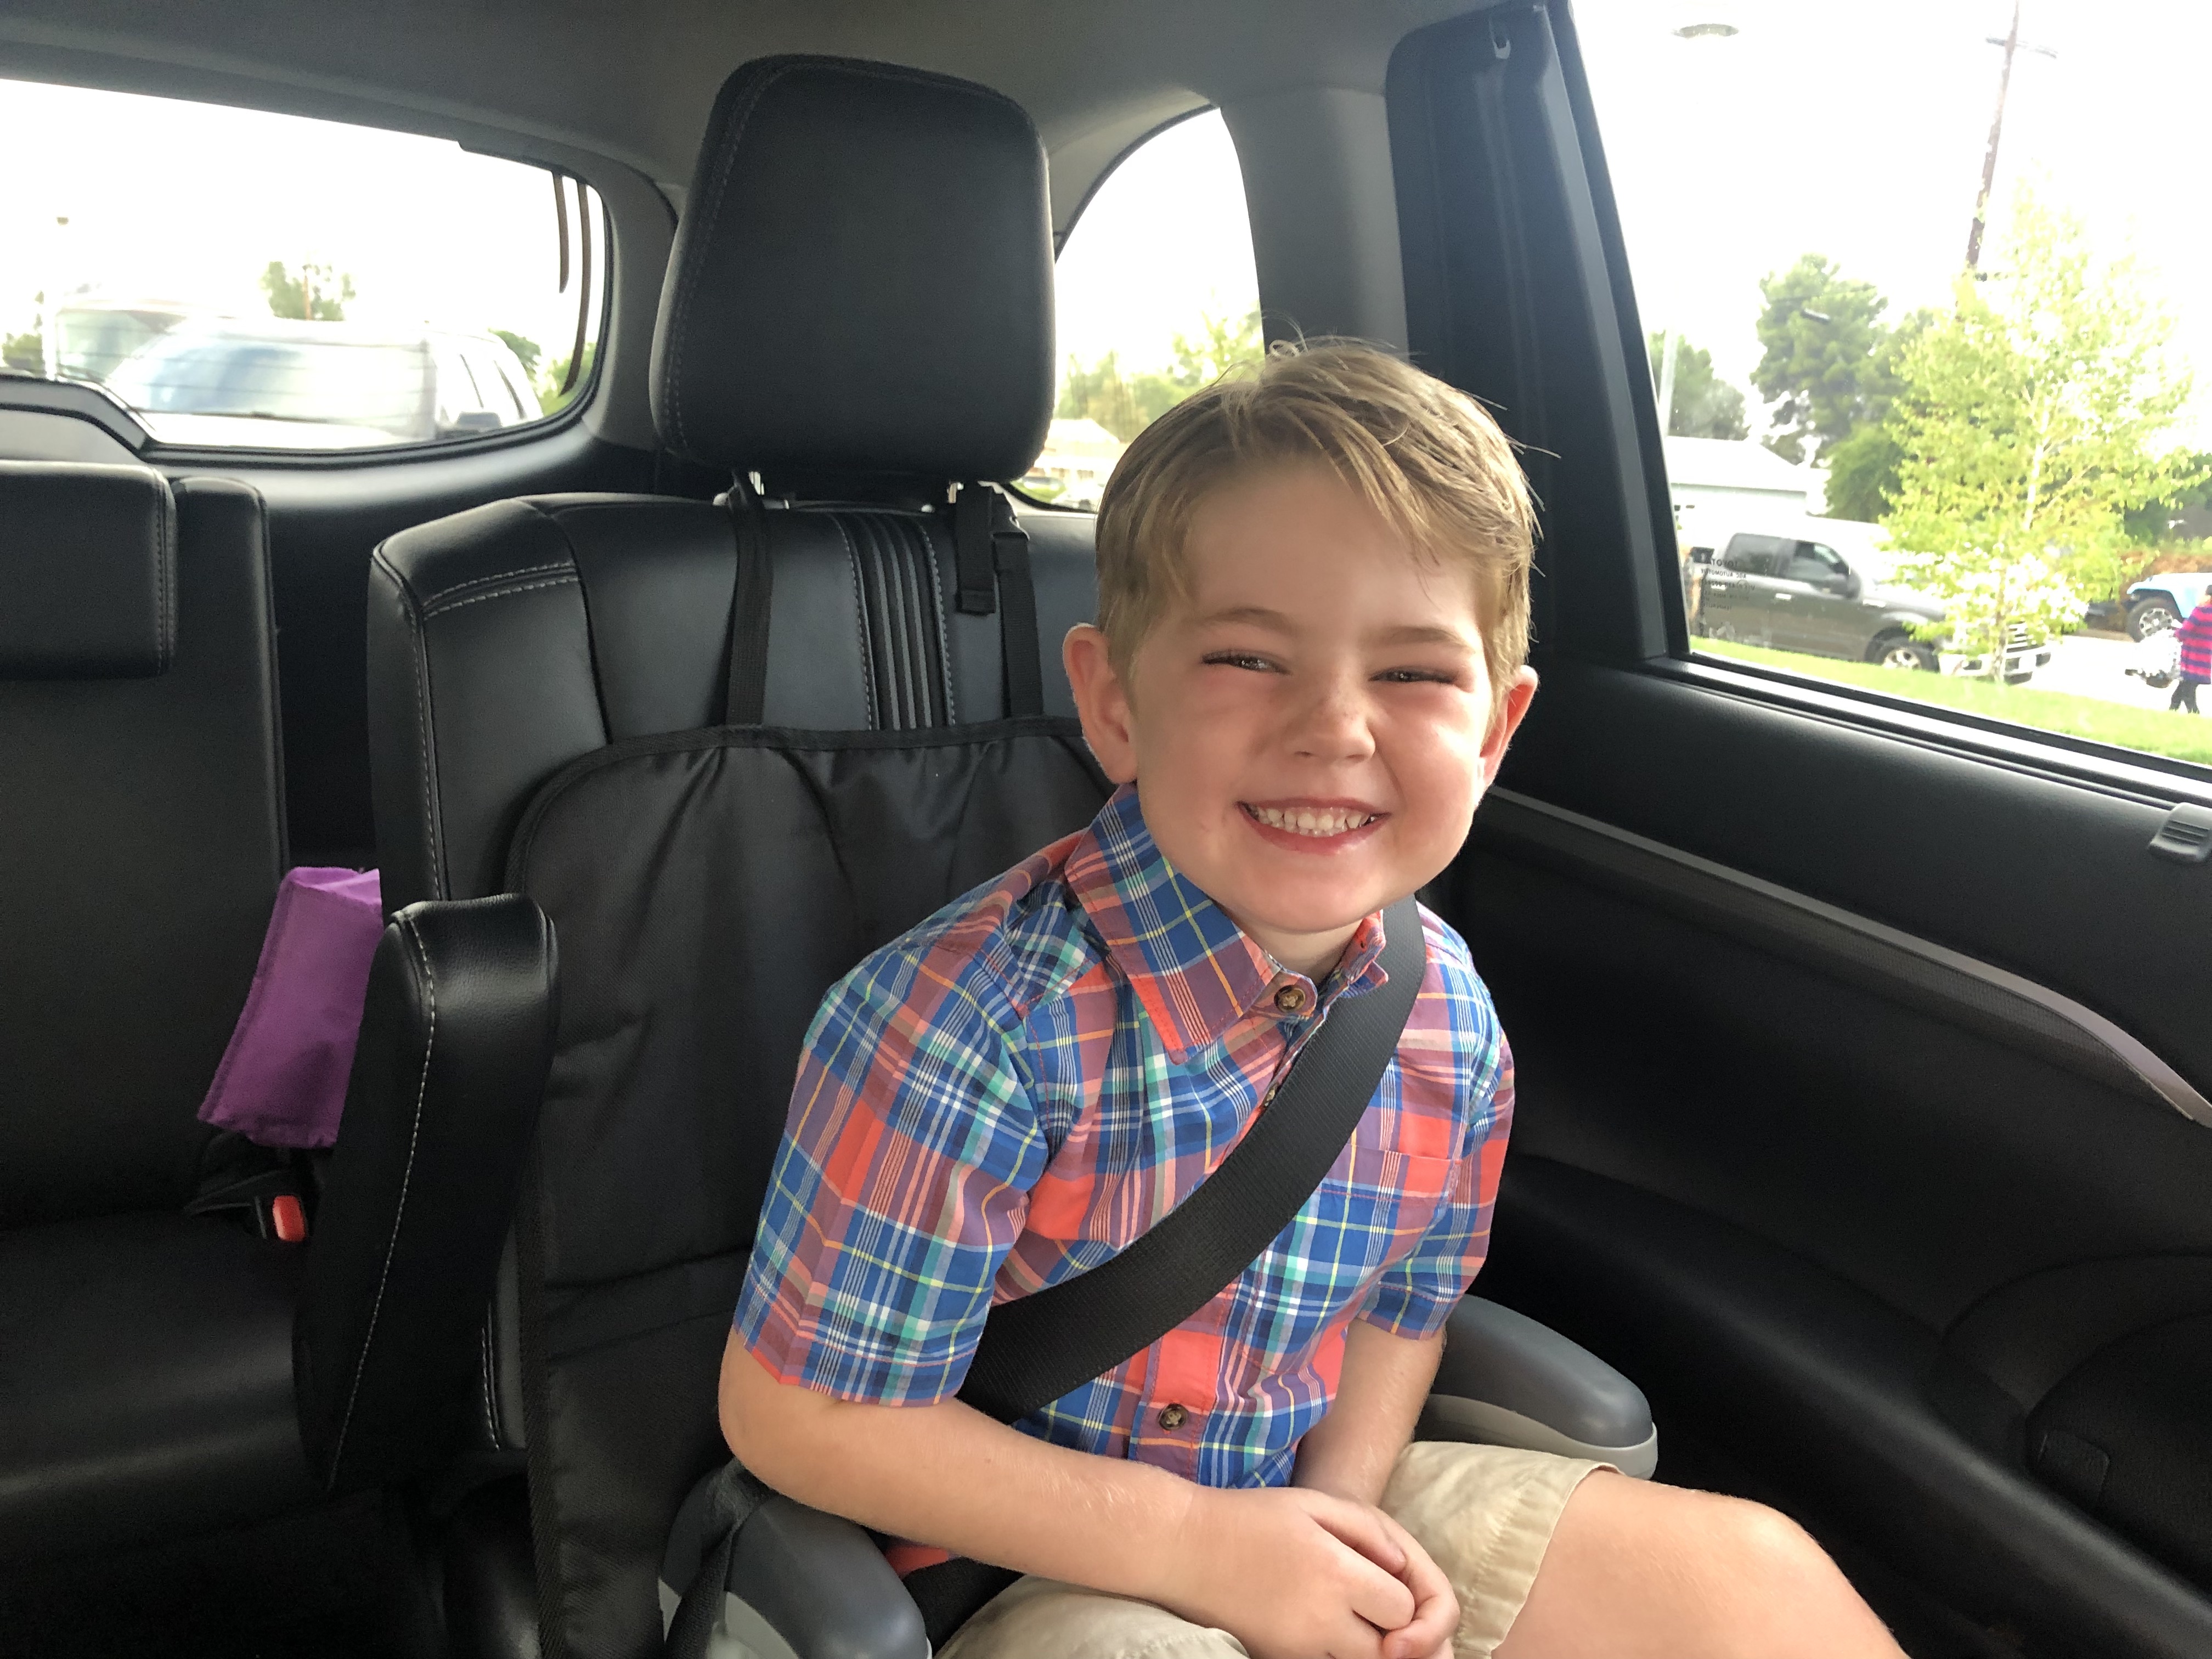 pre-school aged boy in booster seat and seatbelt